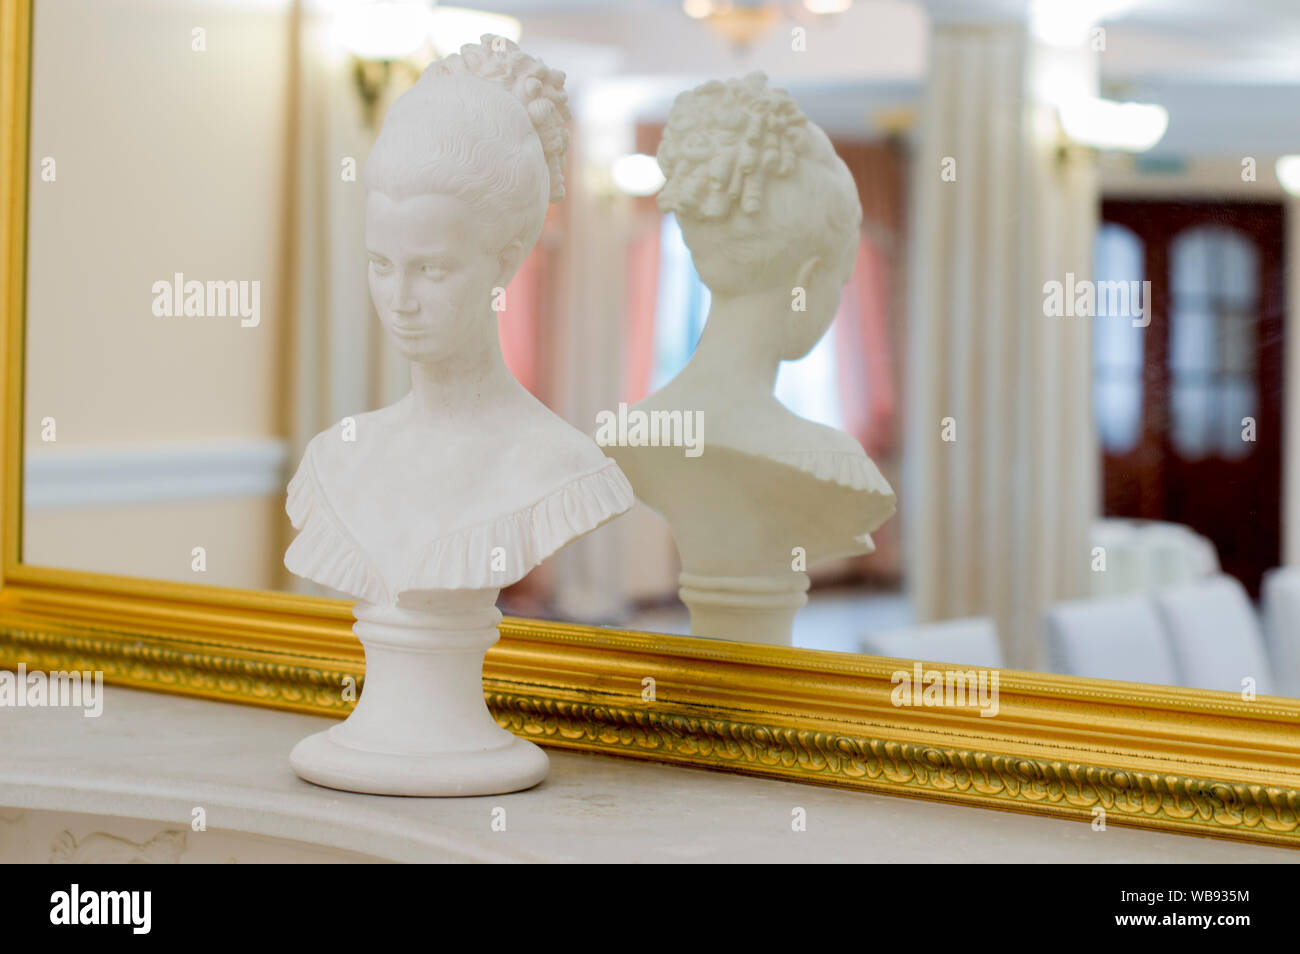 Beautiful figurine of the head of a girl with curly hair .On a shelf near the mirror. Stock Photo